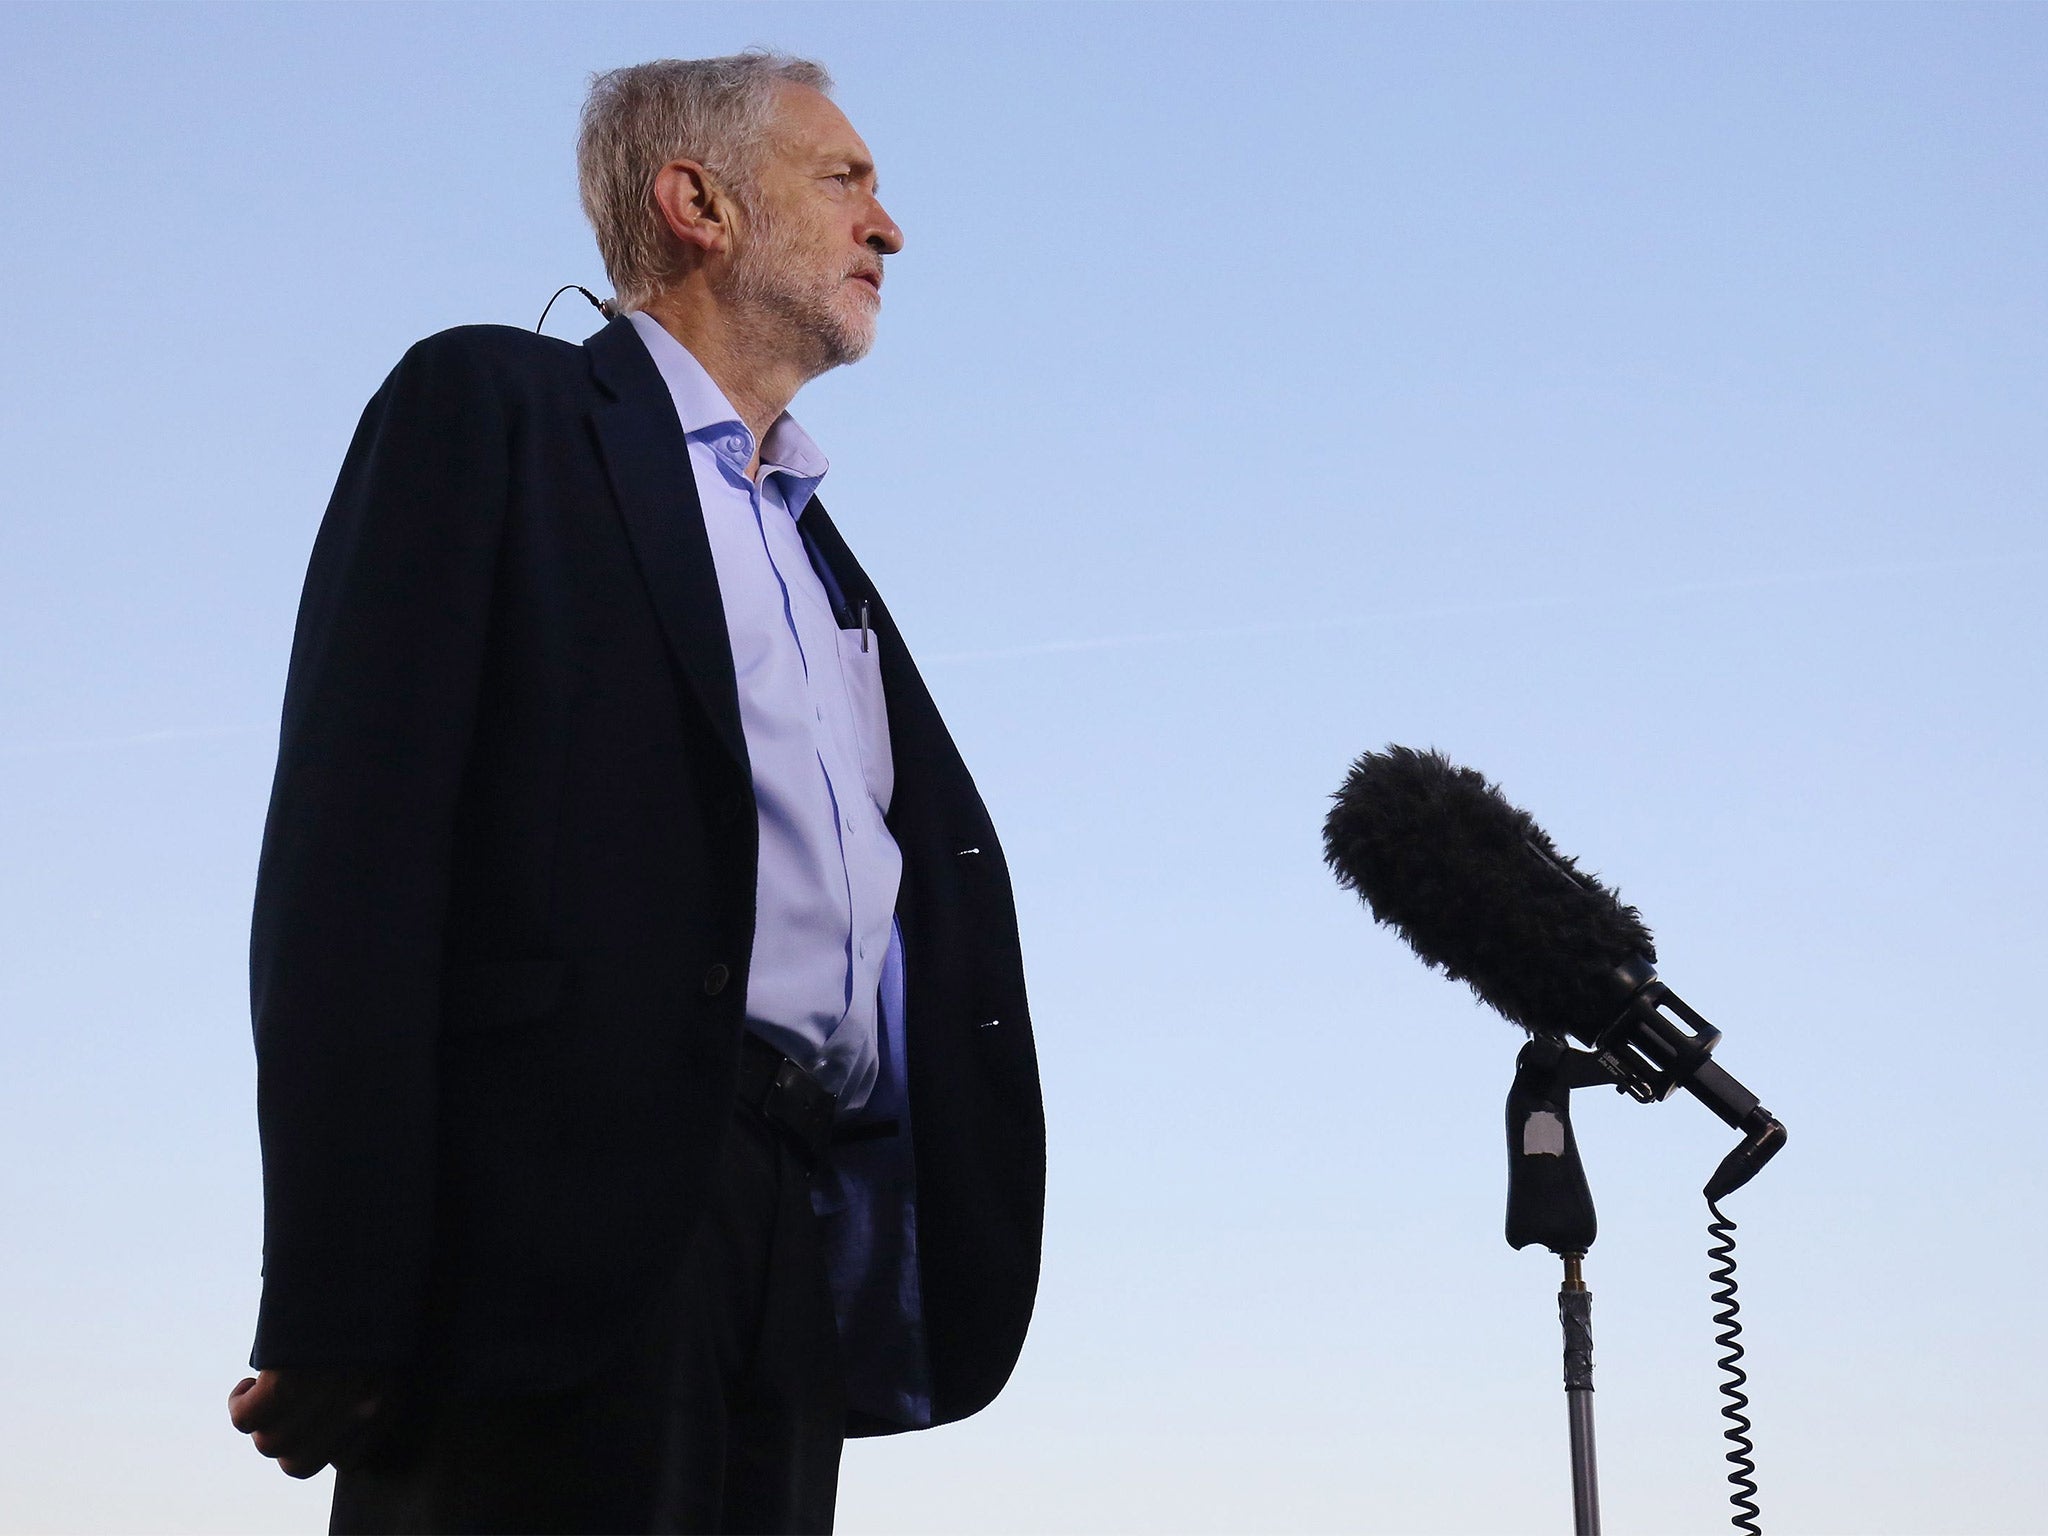 Labour leader Jeremy Corbyn being interviewed for breakfast television on Wednesday